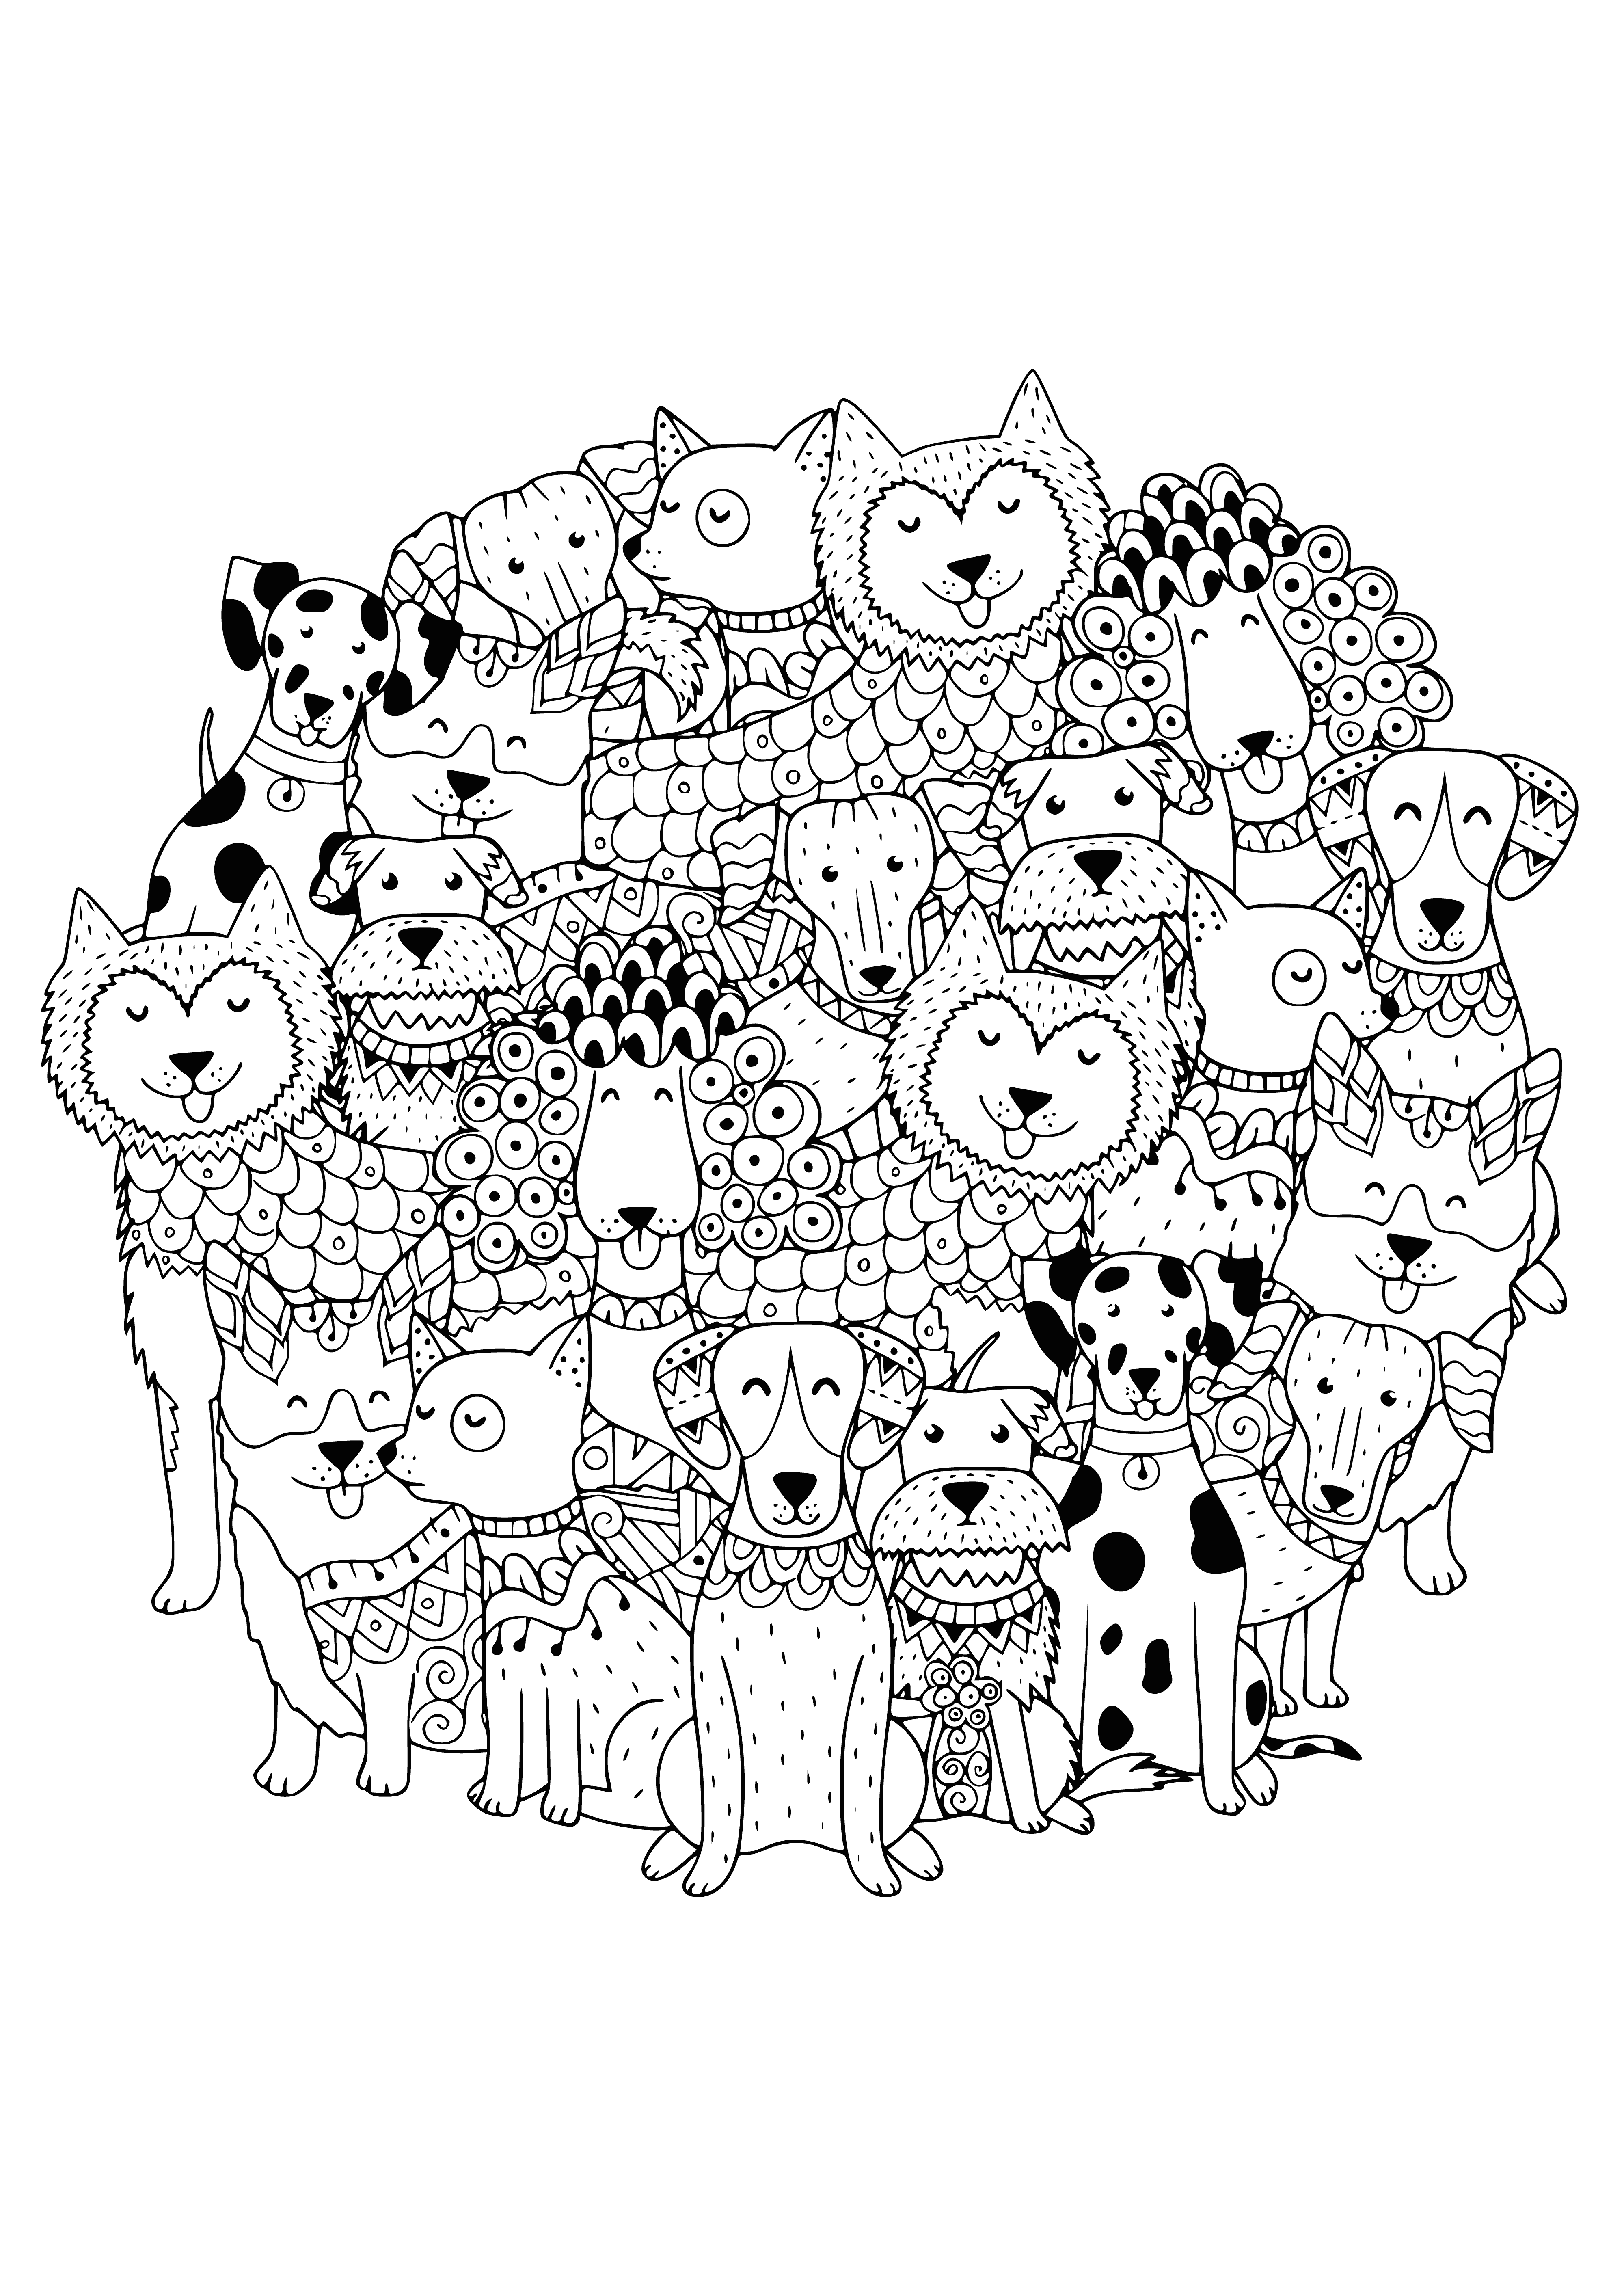 coloring page: Dog licking paw, scratching ear, eyed closed, tail wagging, rear end in air.